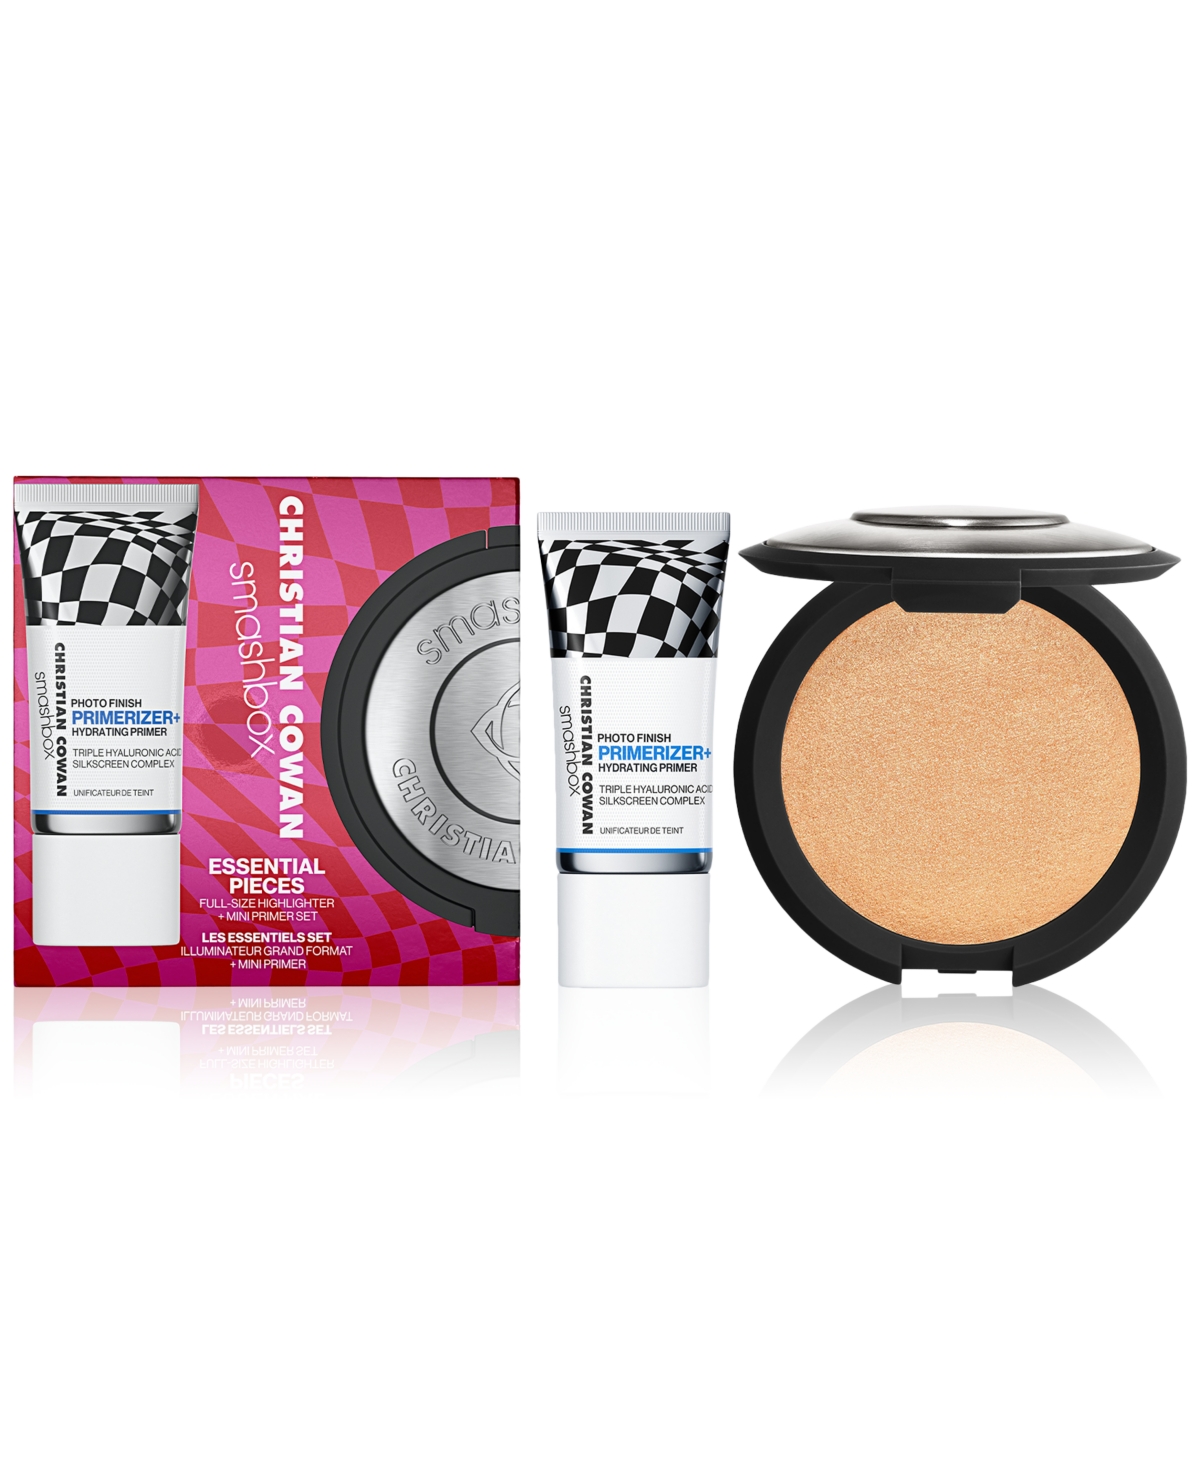 Smashbox X Christian Cowan Essential Pieces Full-size Highlighter + Mini Primer Set In Na